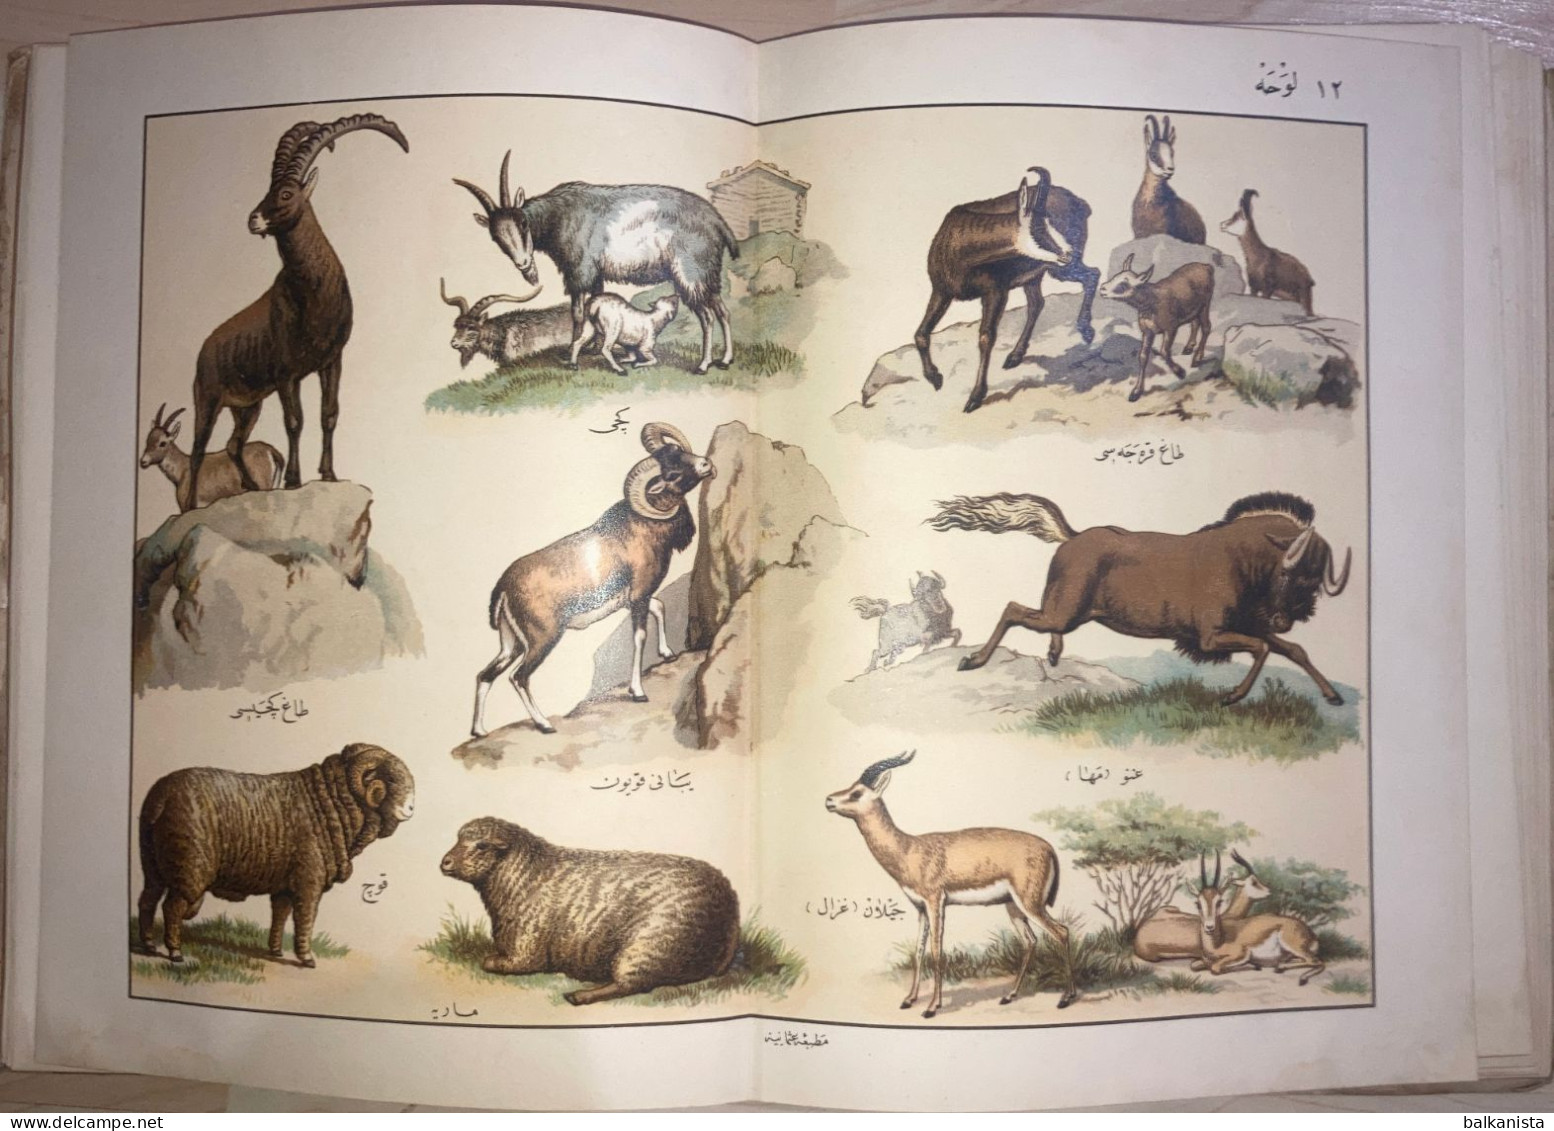 OTTOMAN- Musavver Tarif-i Hayvanat Illustrated Guide To Animals Colored 1893 - Old Books